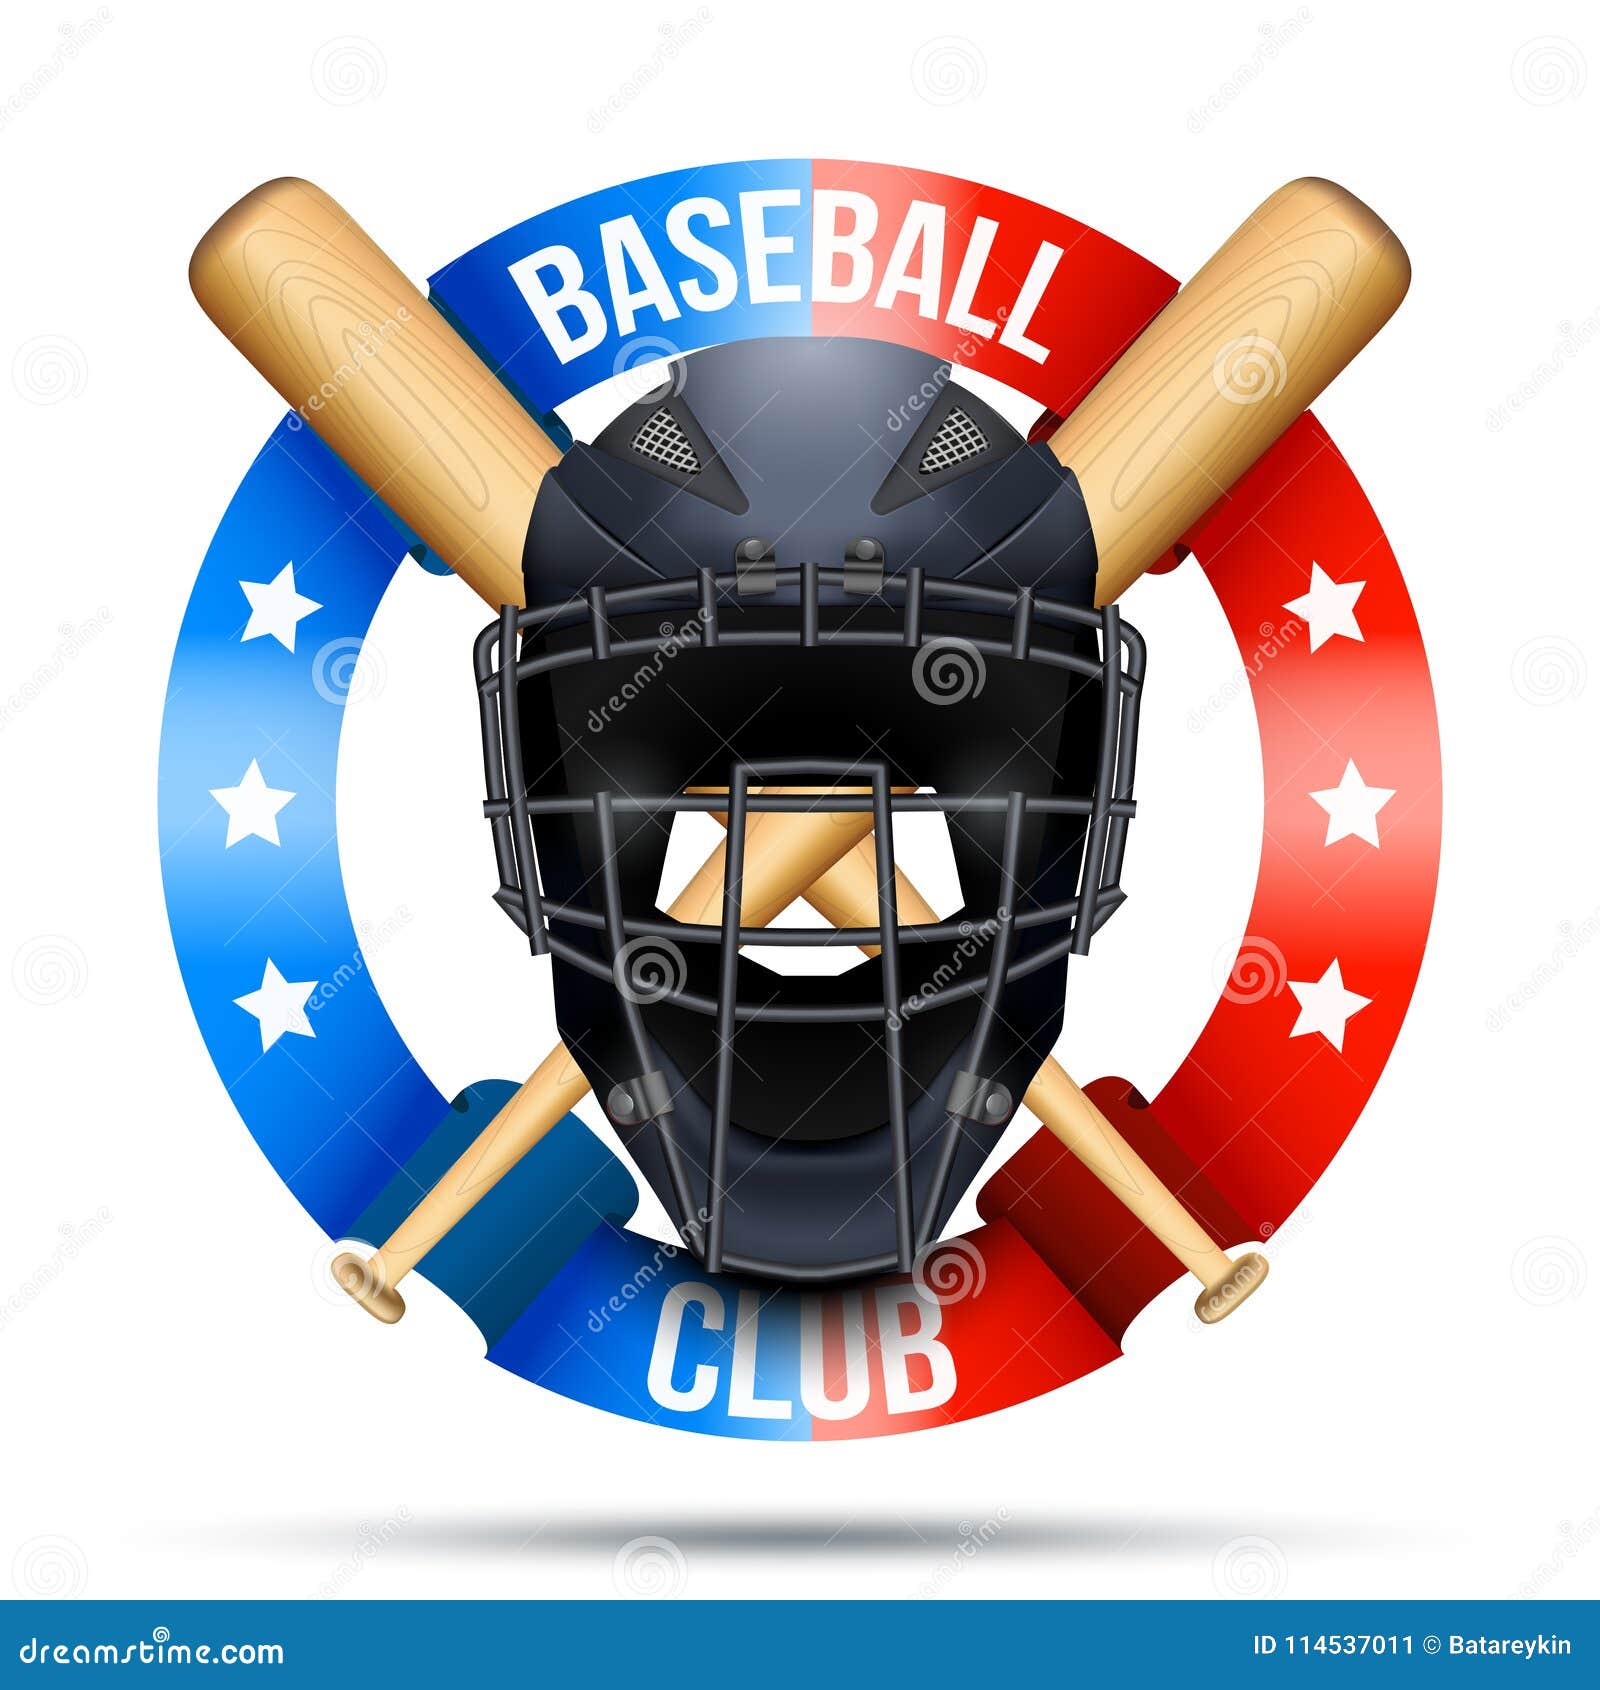 Helm Catcher Baseball Sport Icon Graphic by yellowhellow